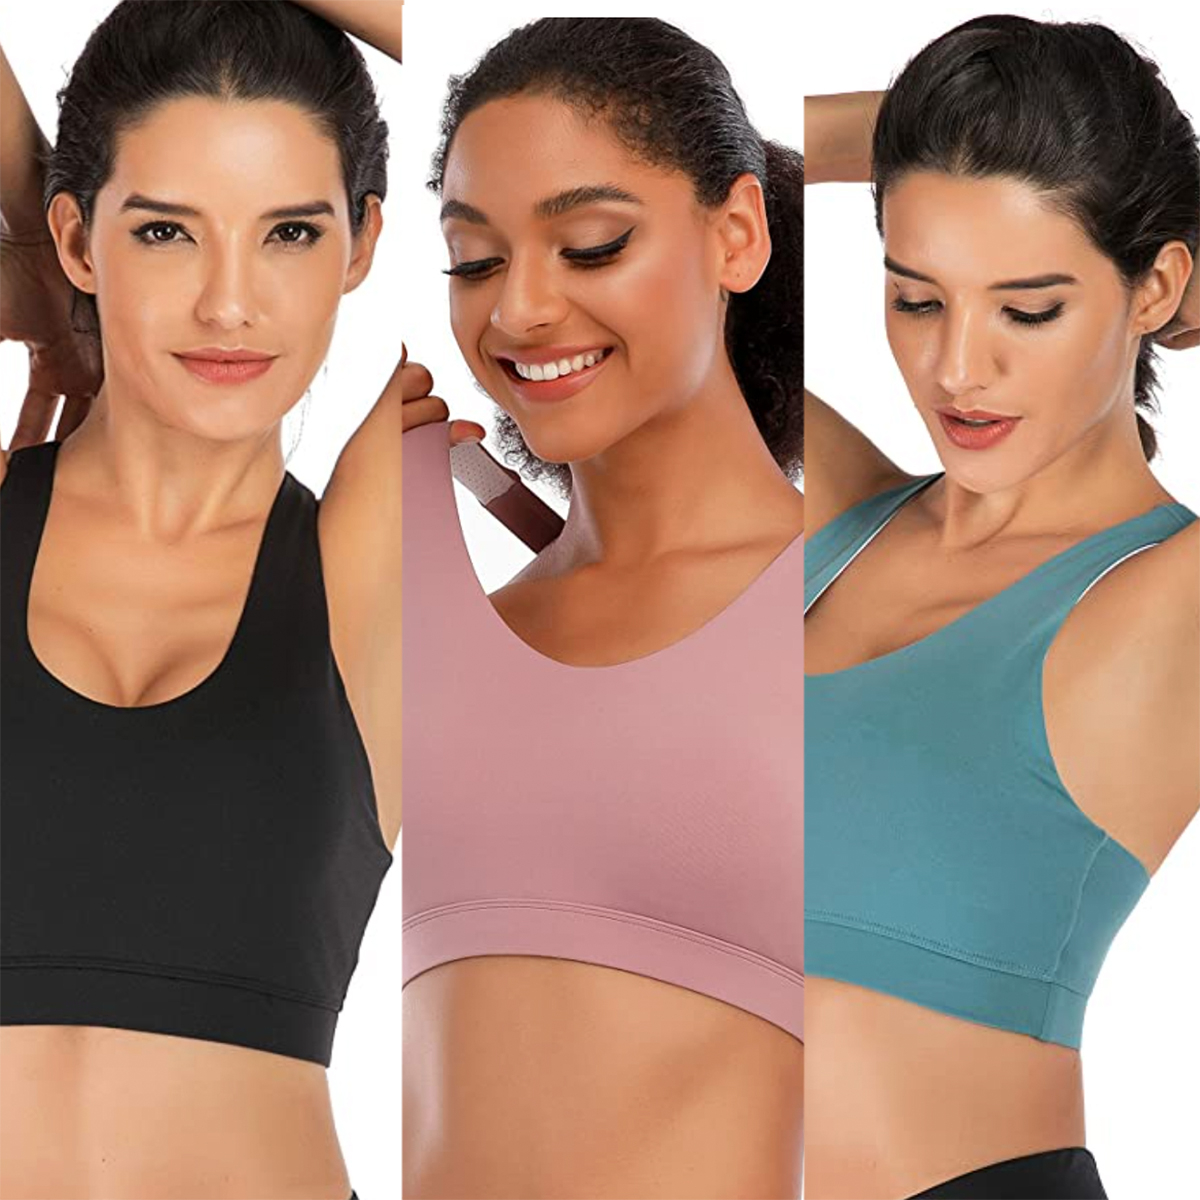 Sports Bra Review: A Sports Bra for Every Woman